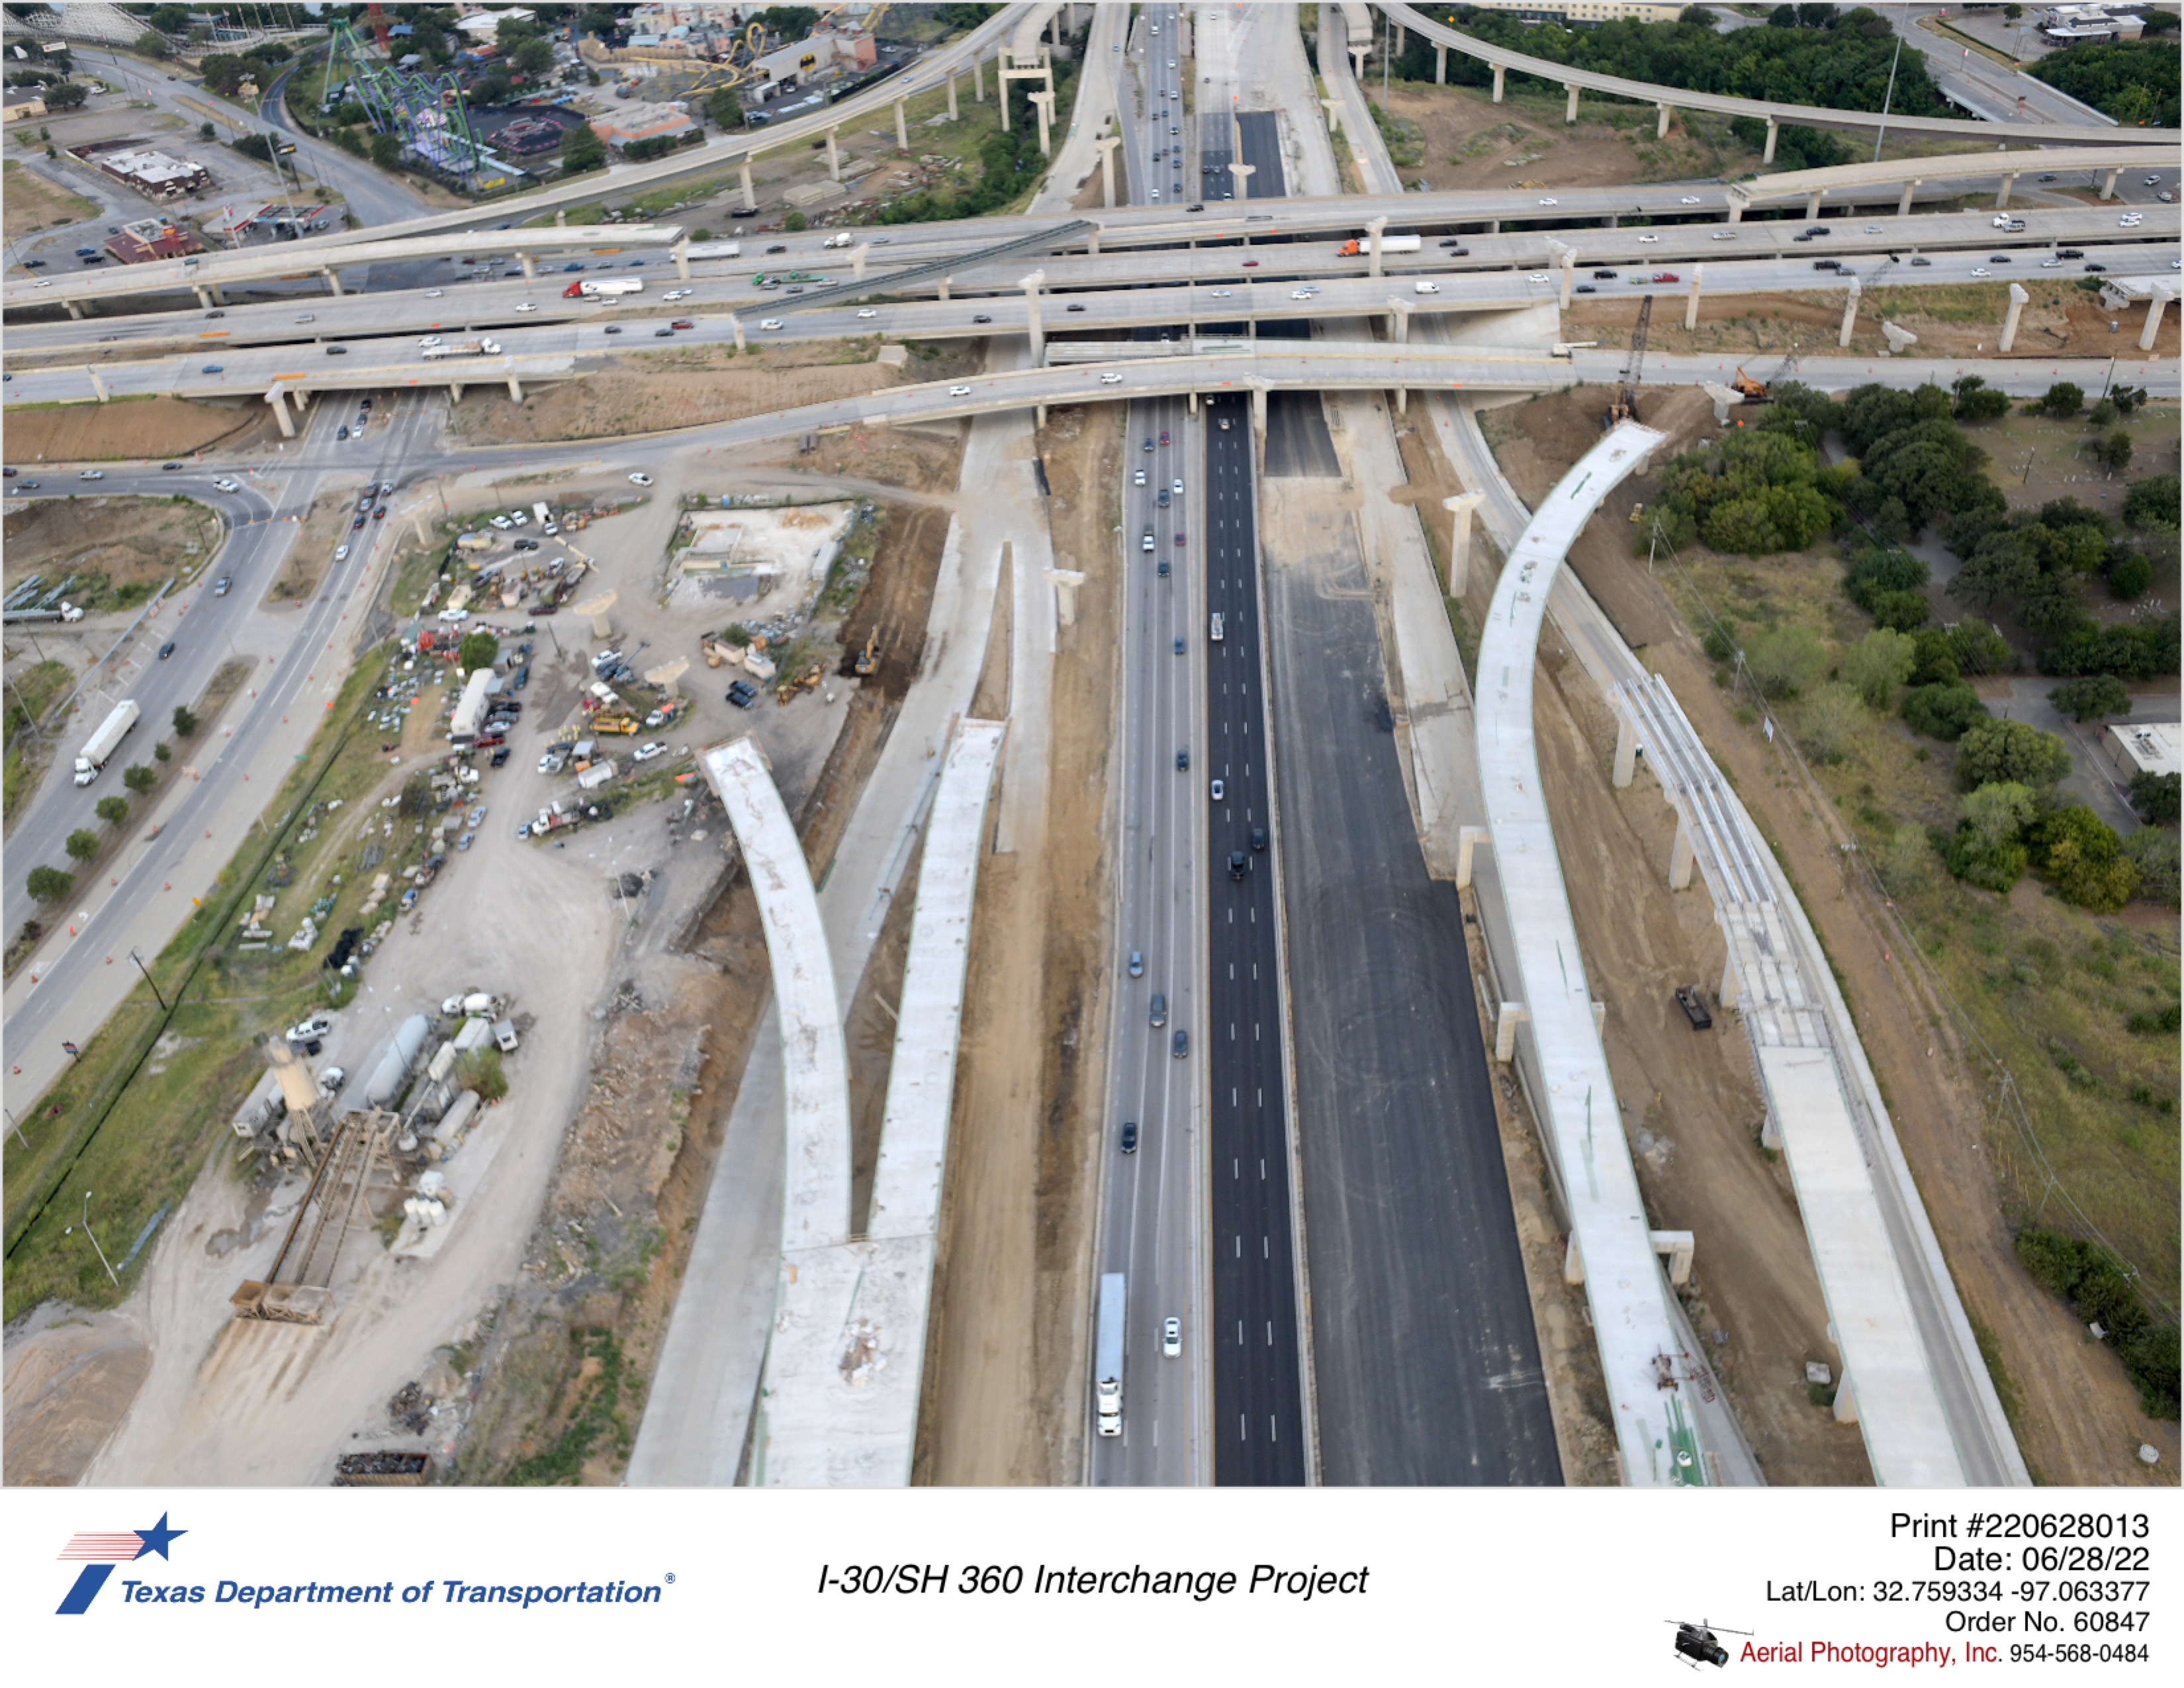 I-30/SH 360 interchange looking west. Image shows construction of I-30 permanent westbound mainlanes and partial construction of new direct connectors.